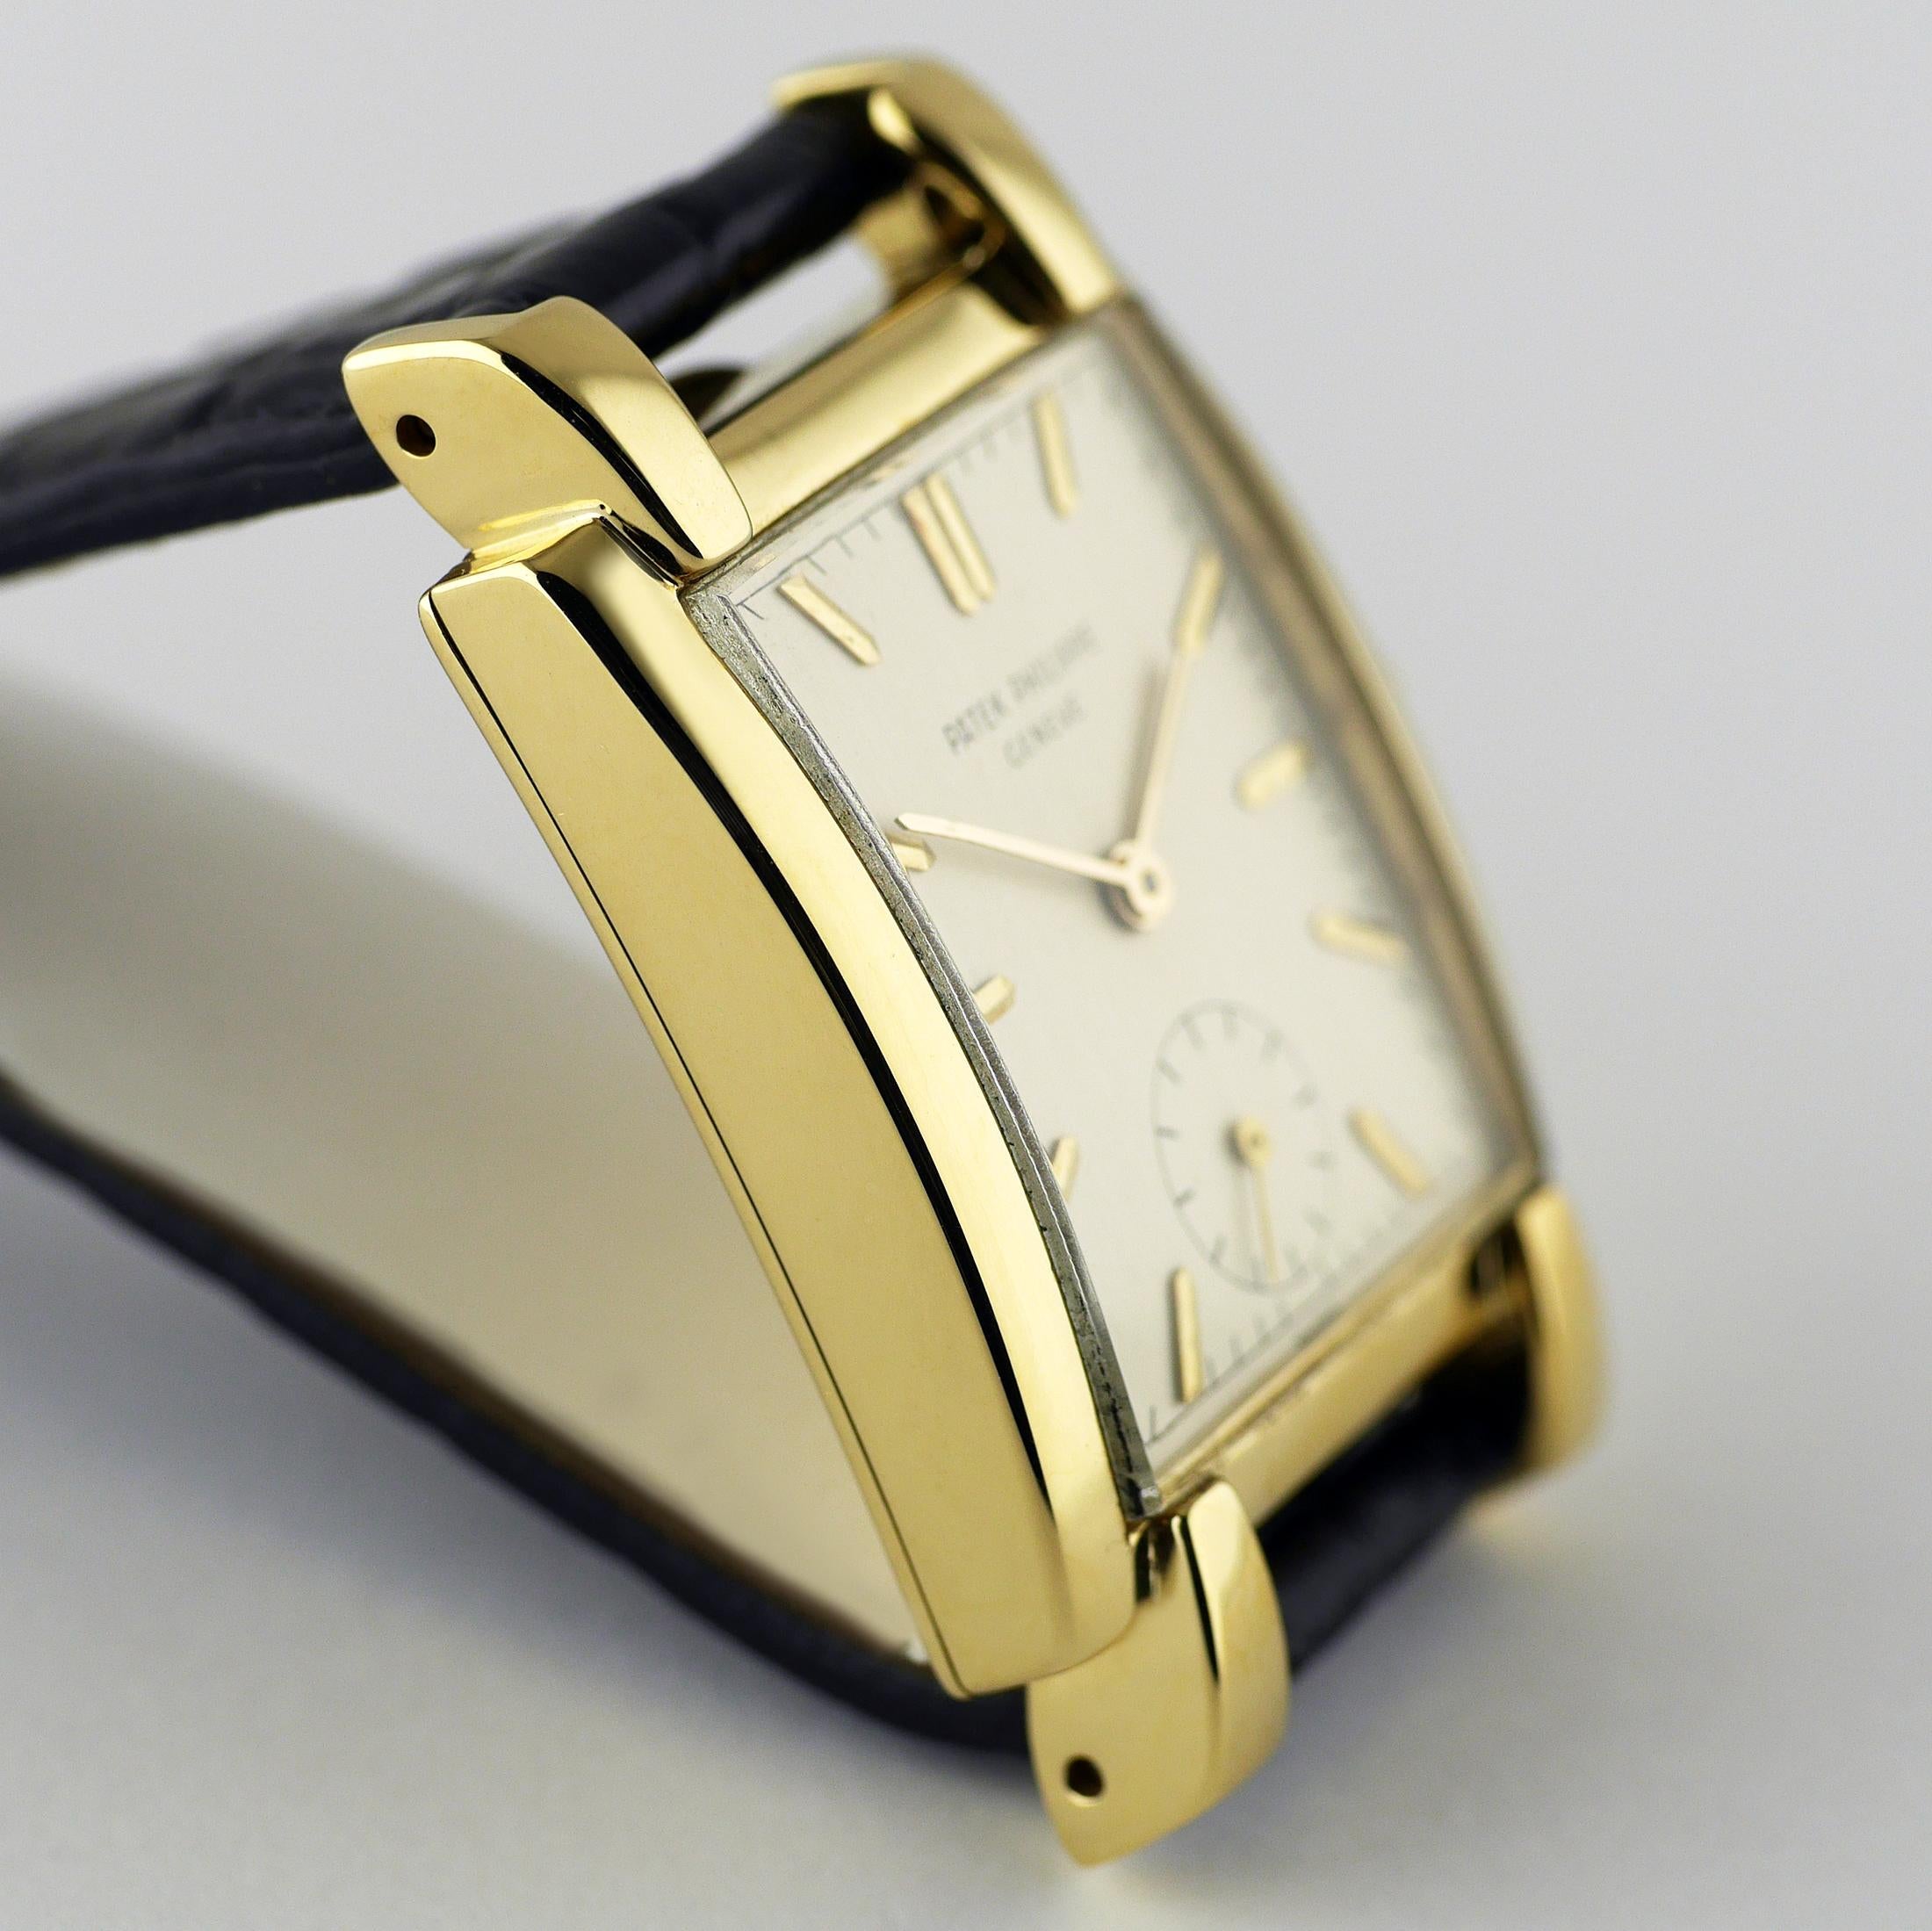 Patek Philippe Gold Wristwatch Dated 1951 For Sale 2